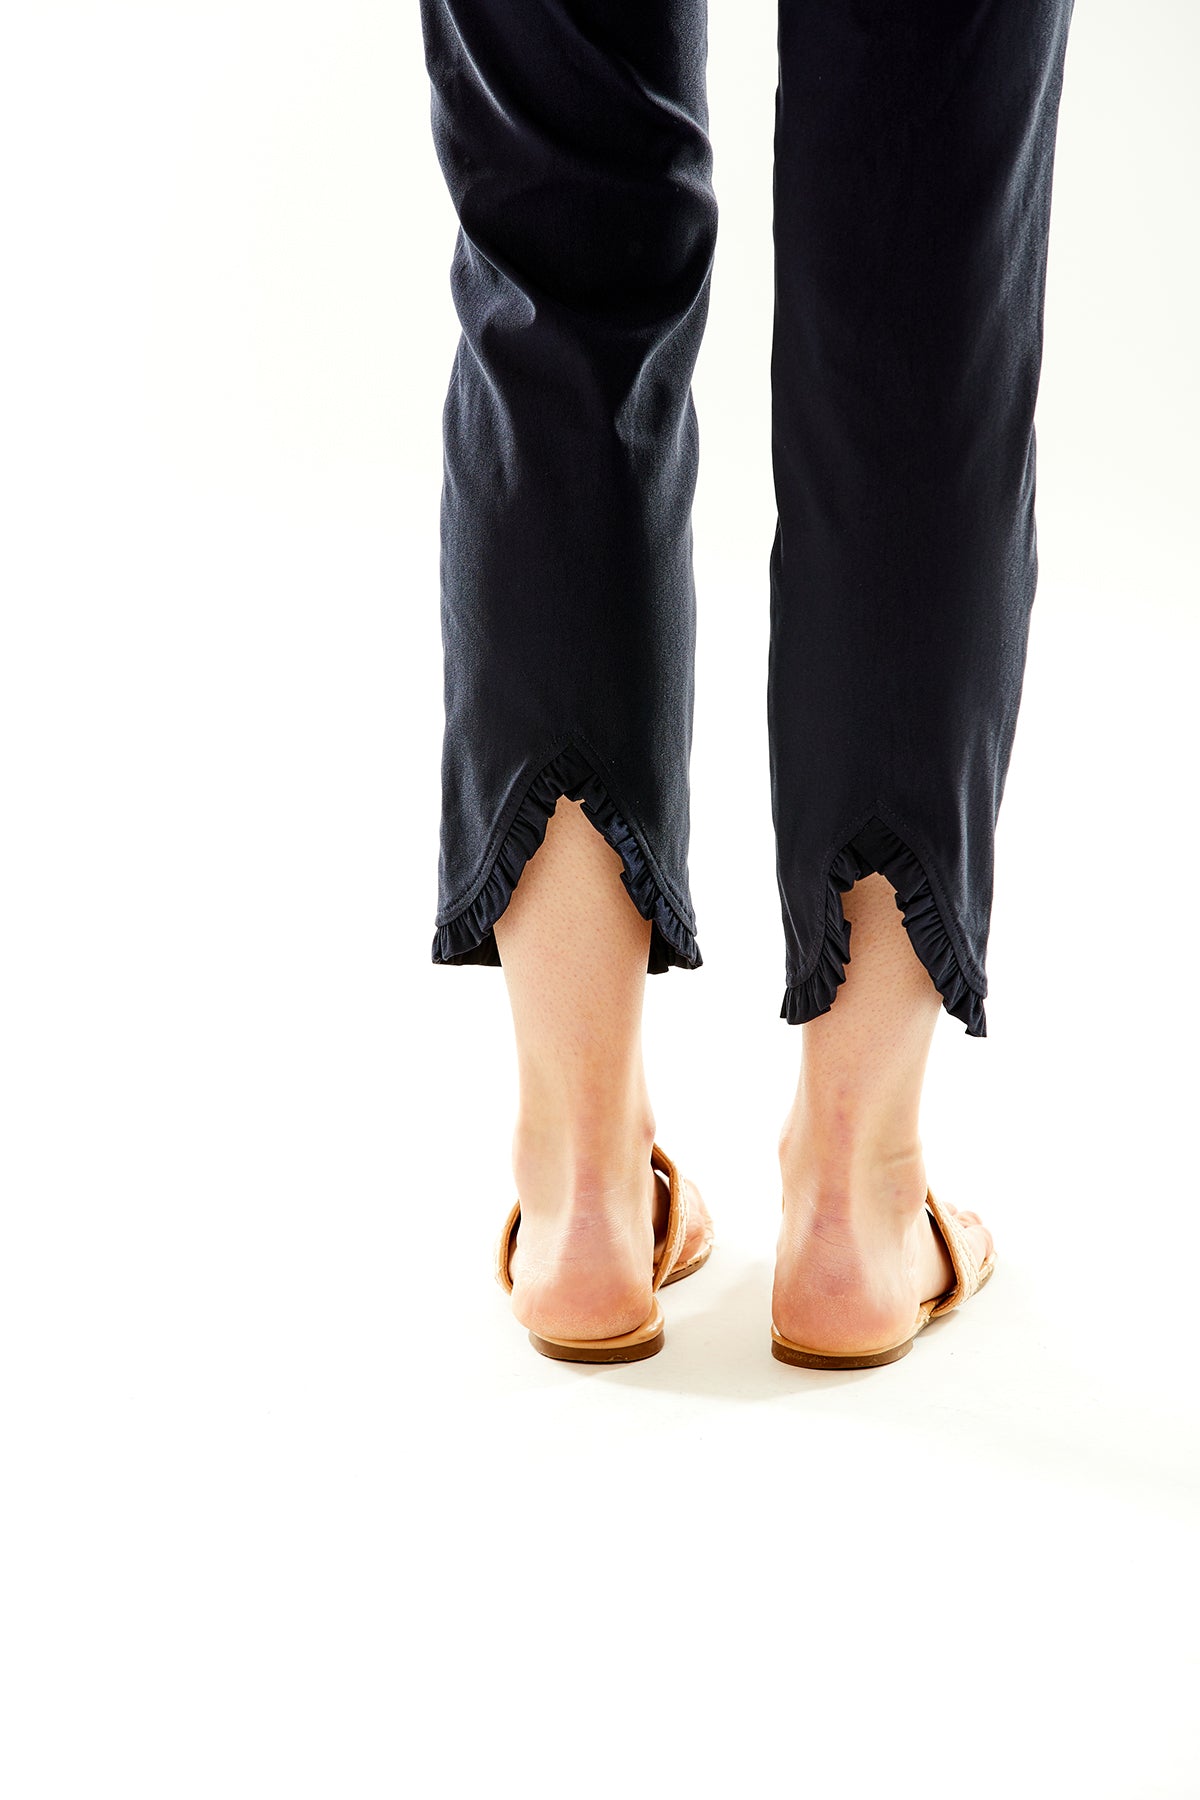 The Sheri Pant with a Mini Ruffle Hem Detail in Navy